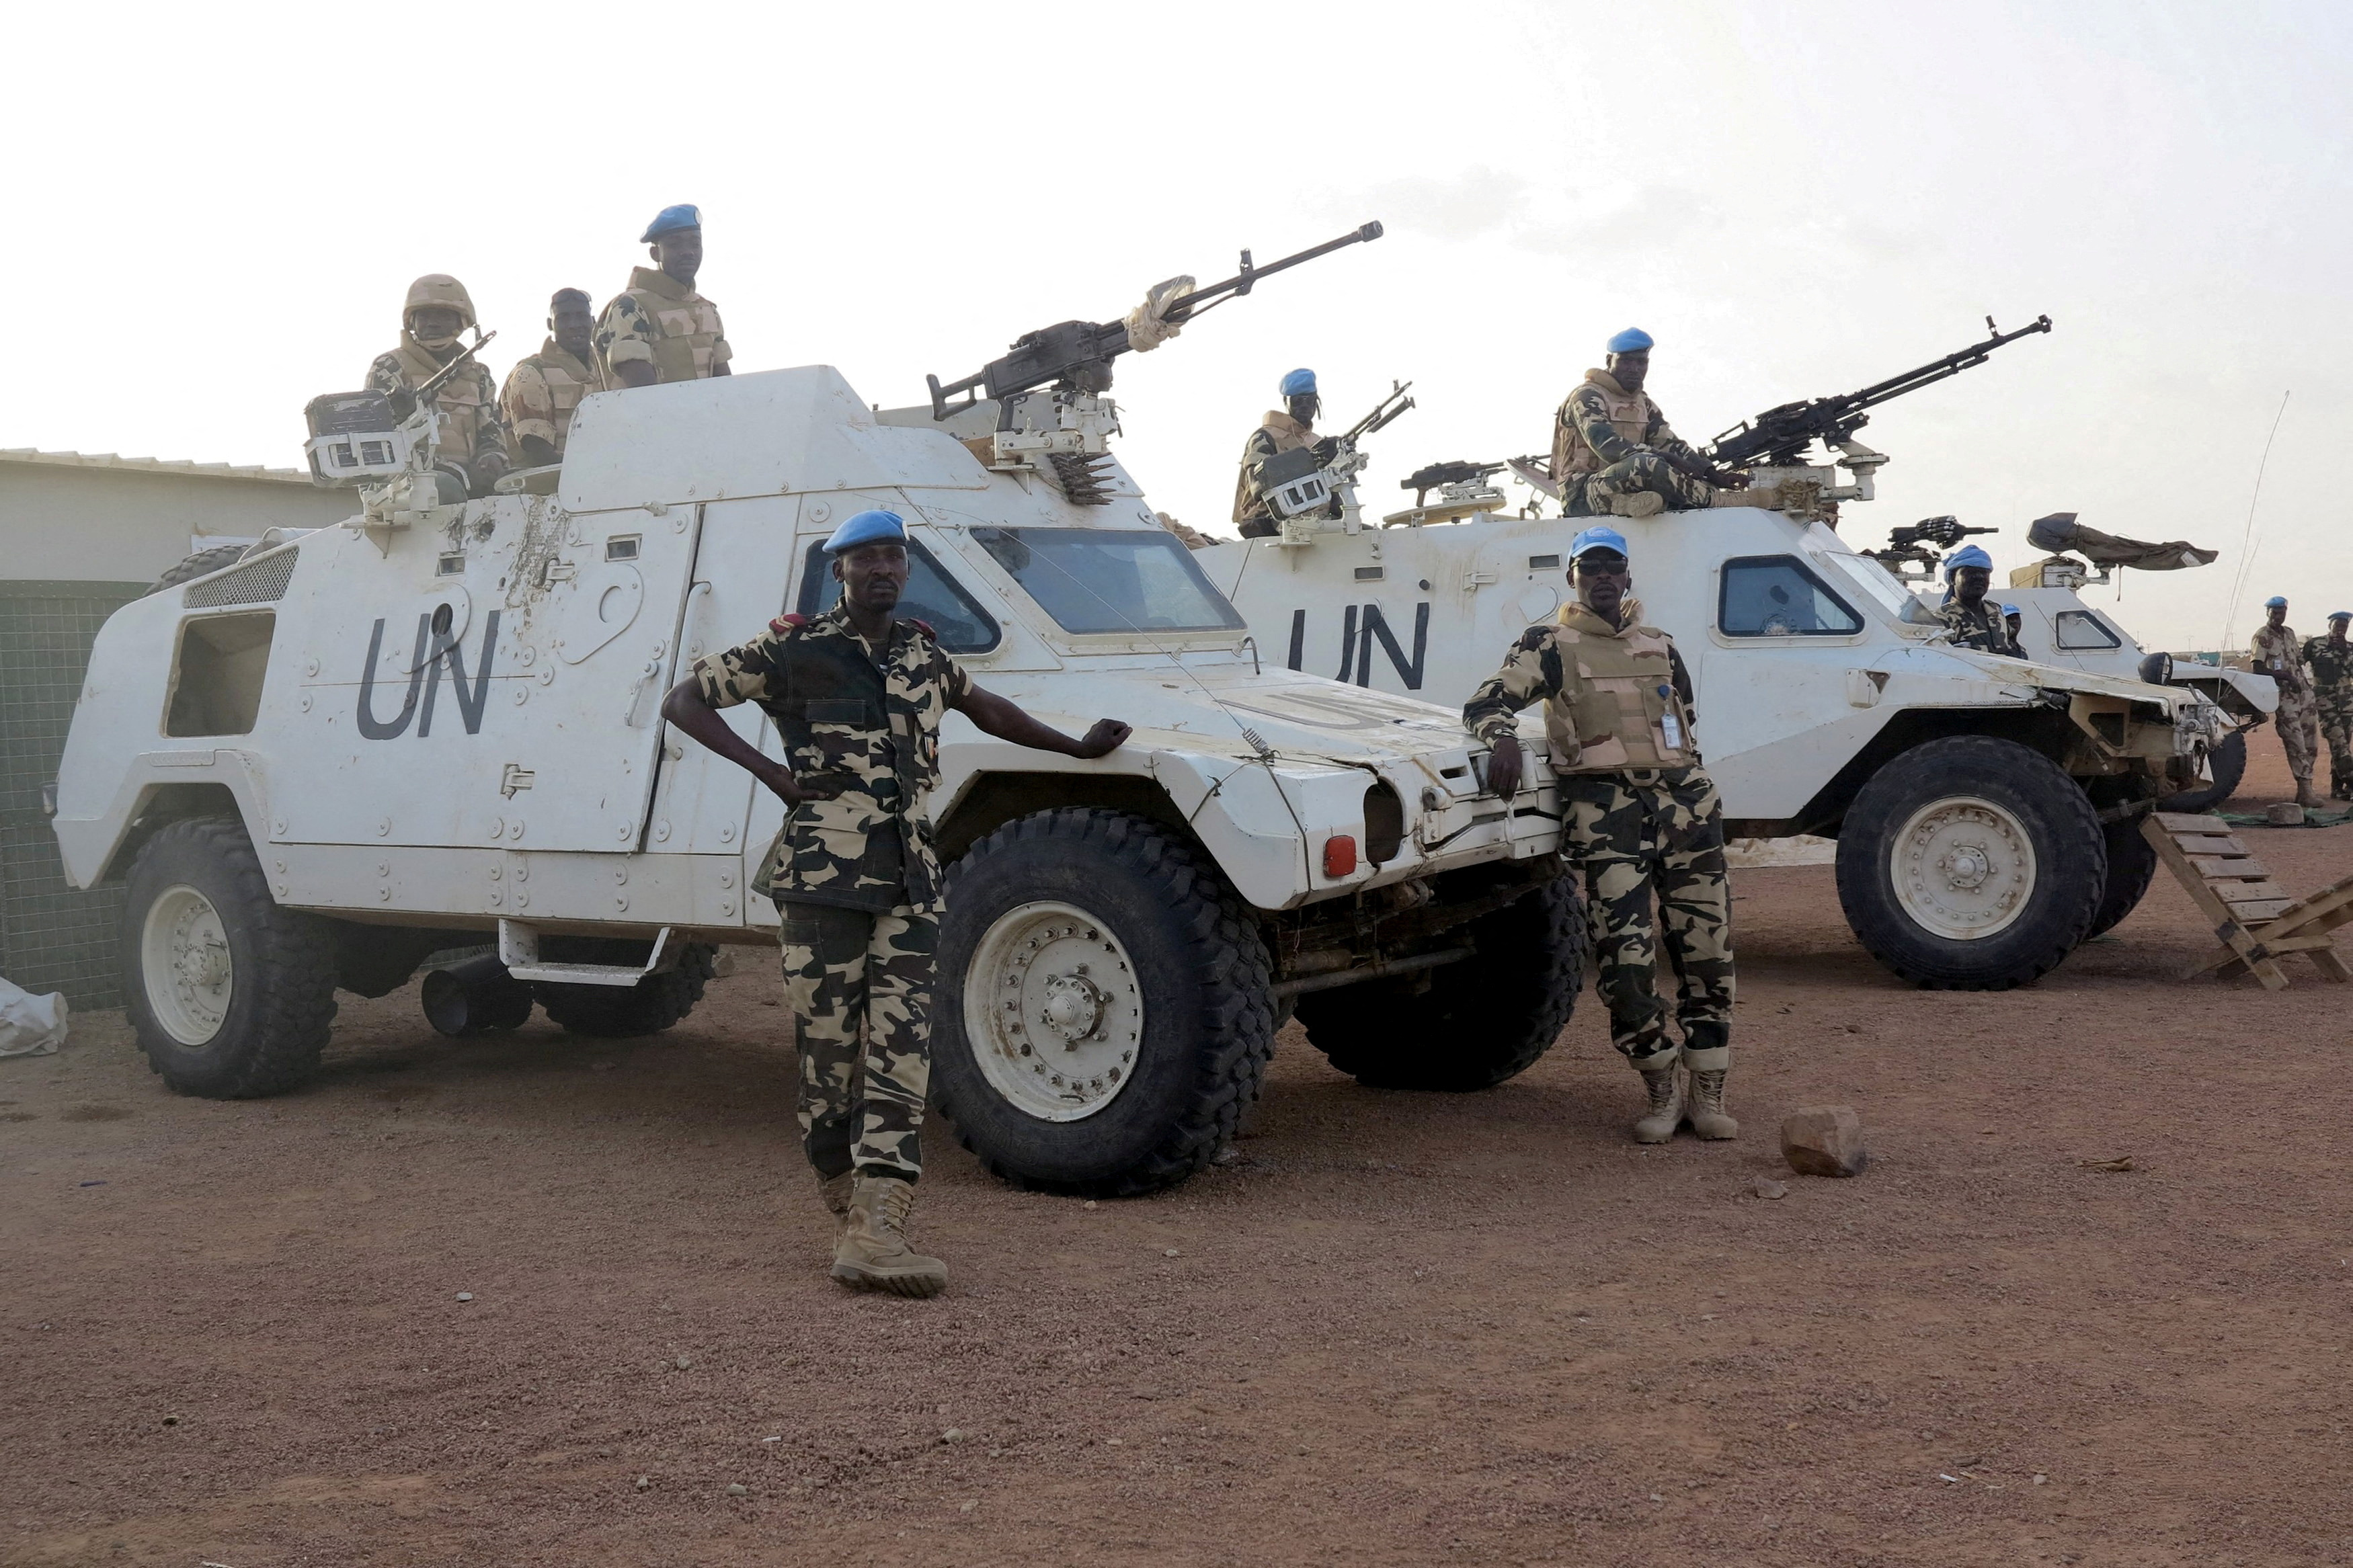 Peacekeeping Funding May Make Africa's Coups More Likely